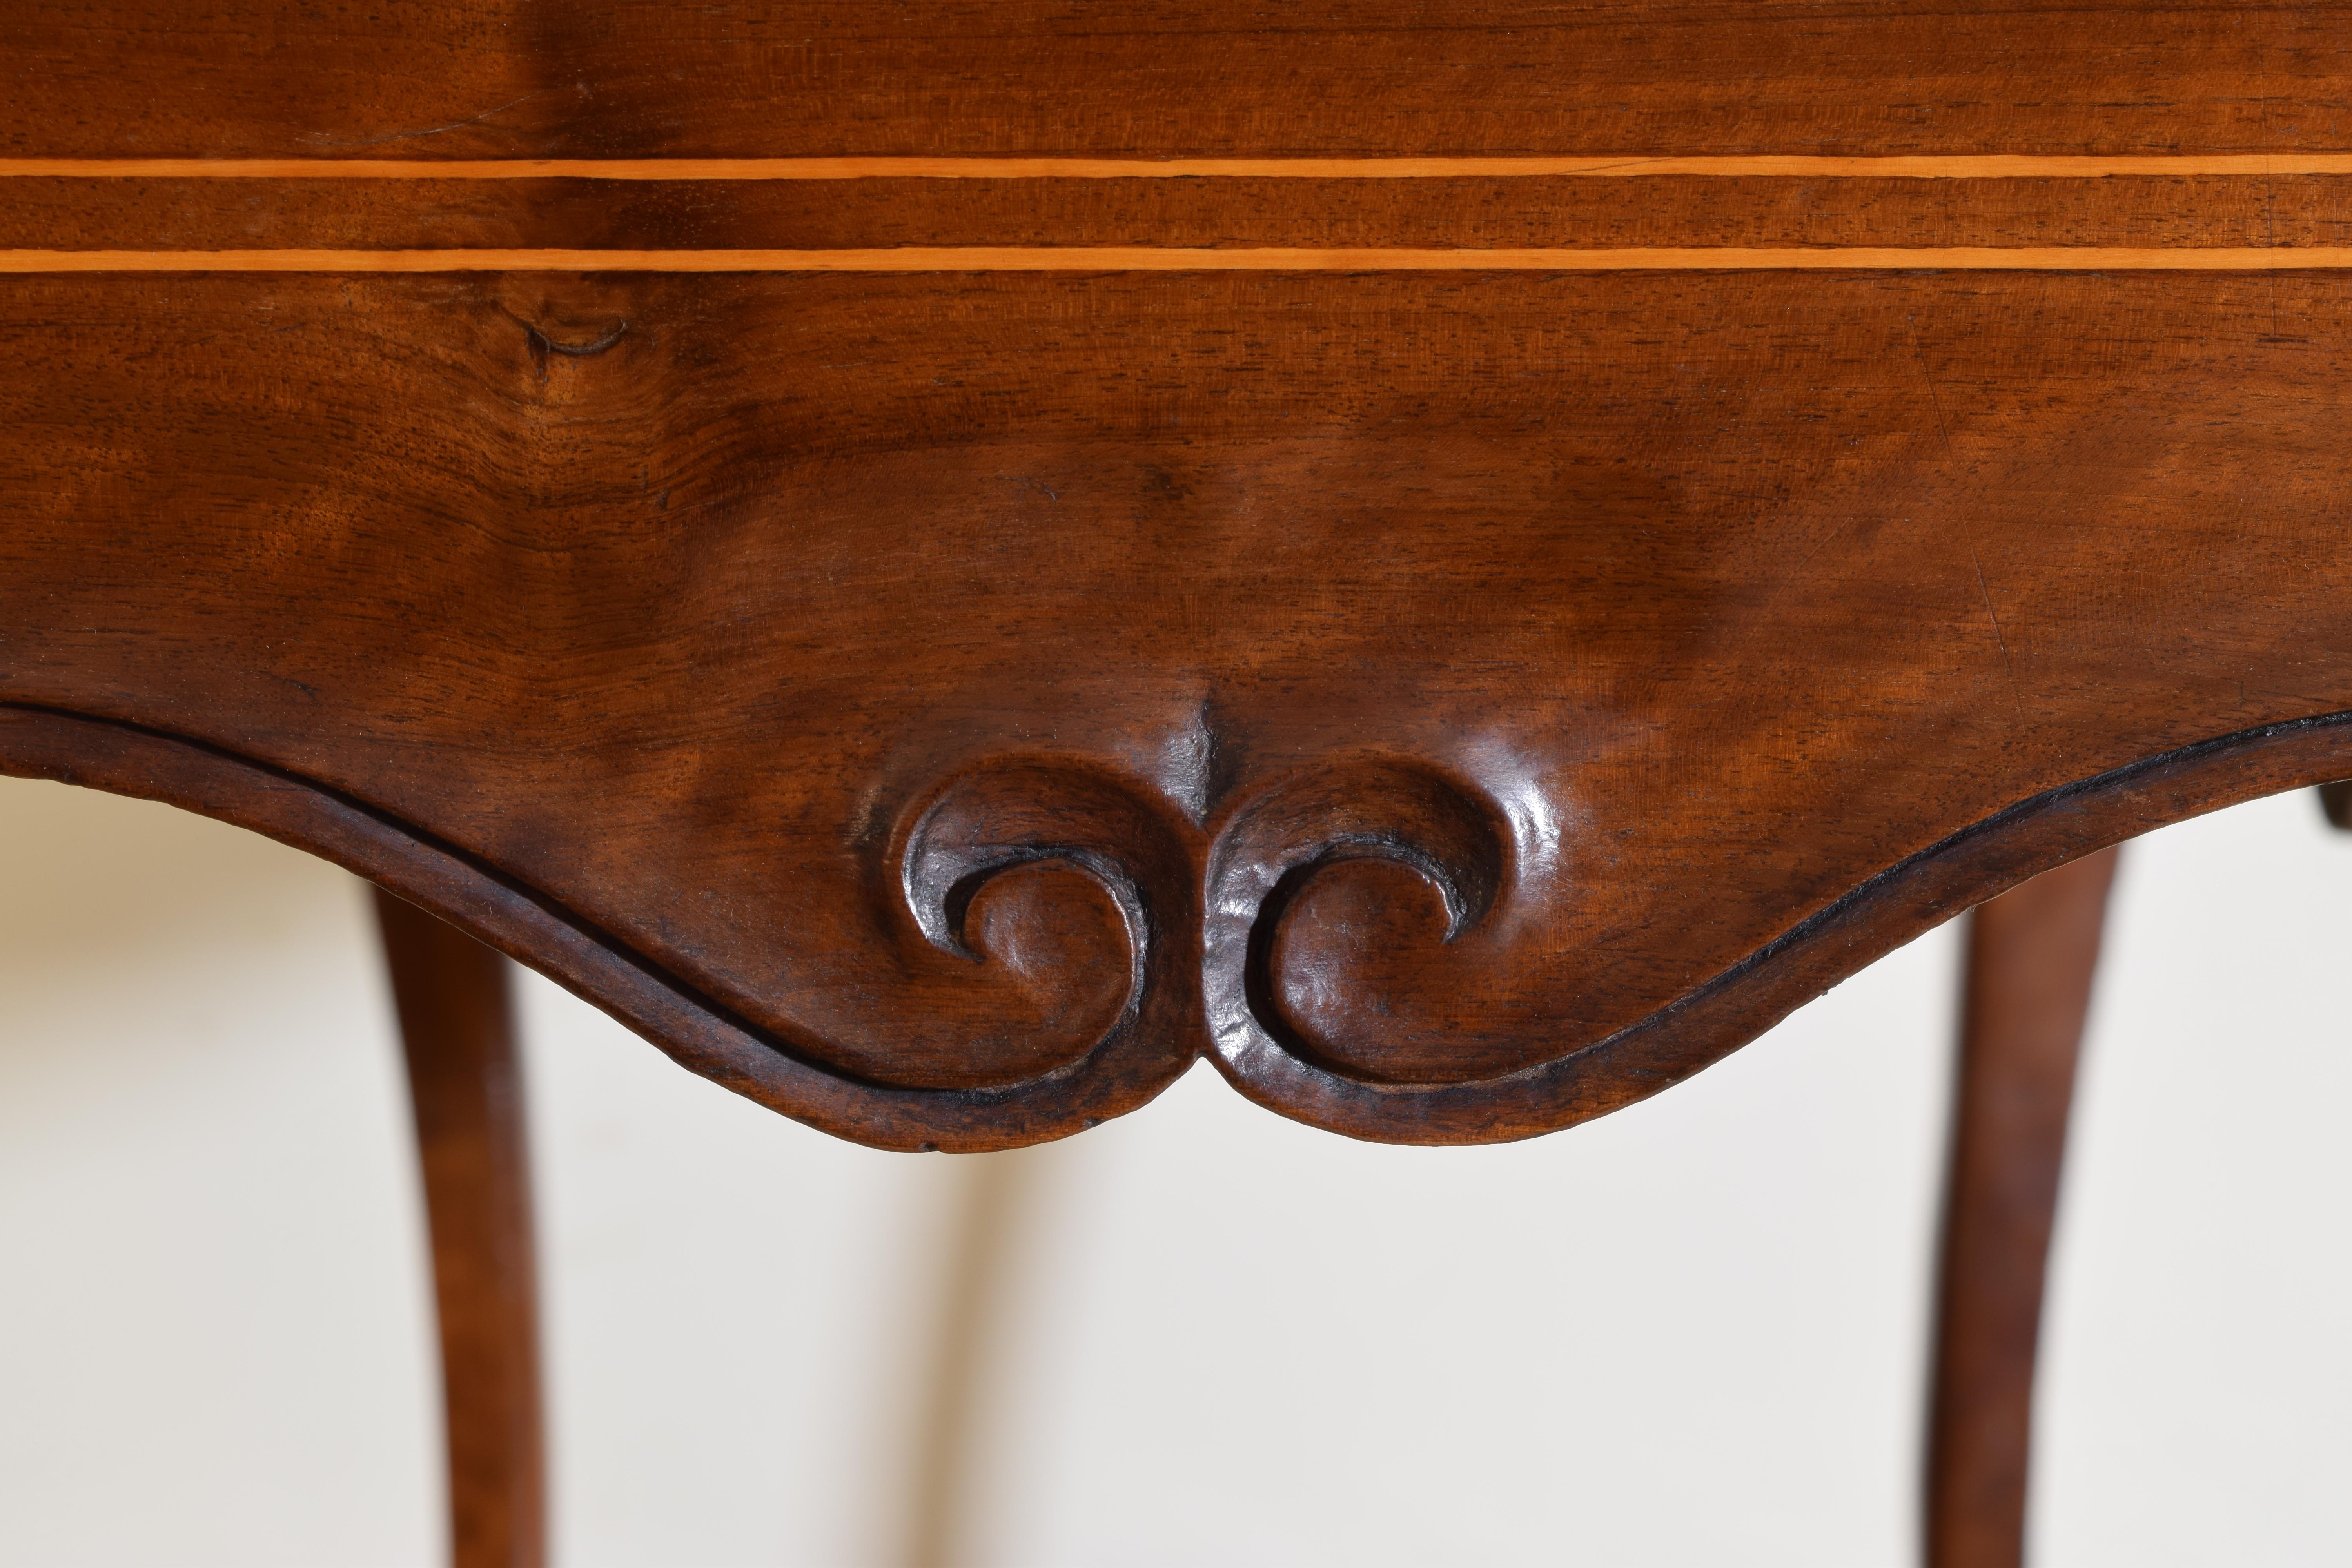 Portuguese Rococo Period Carved Walnut & Inlaid 1-Drawer Console, mid 18th cen. For Sale 6